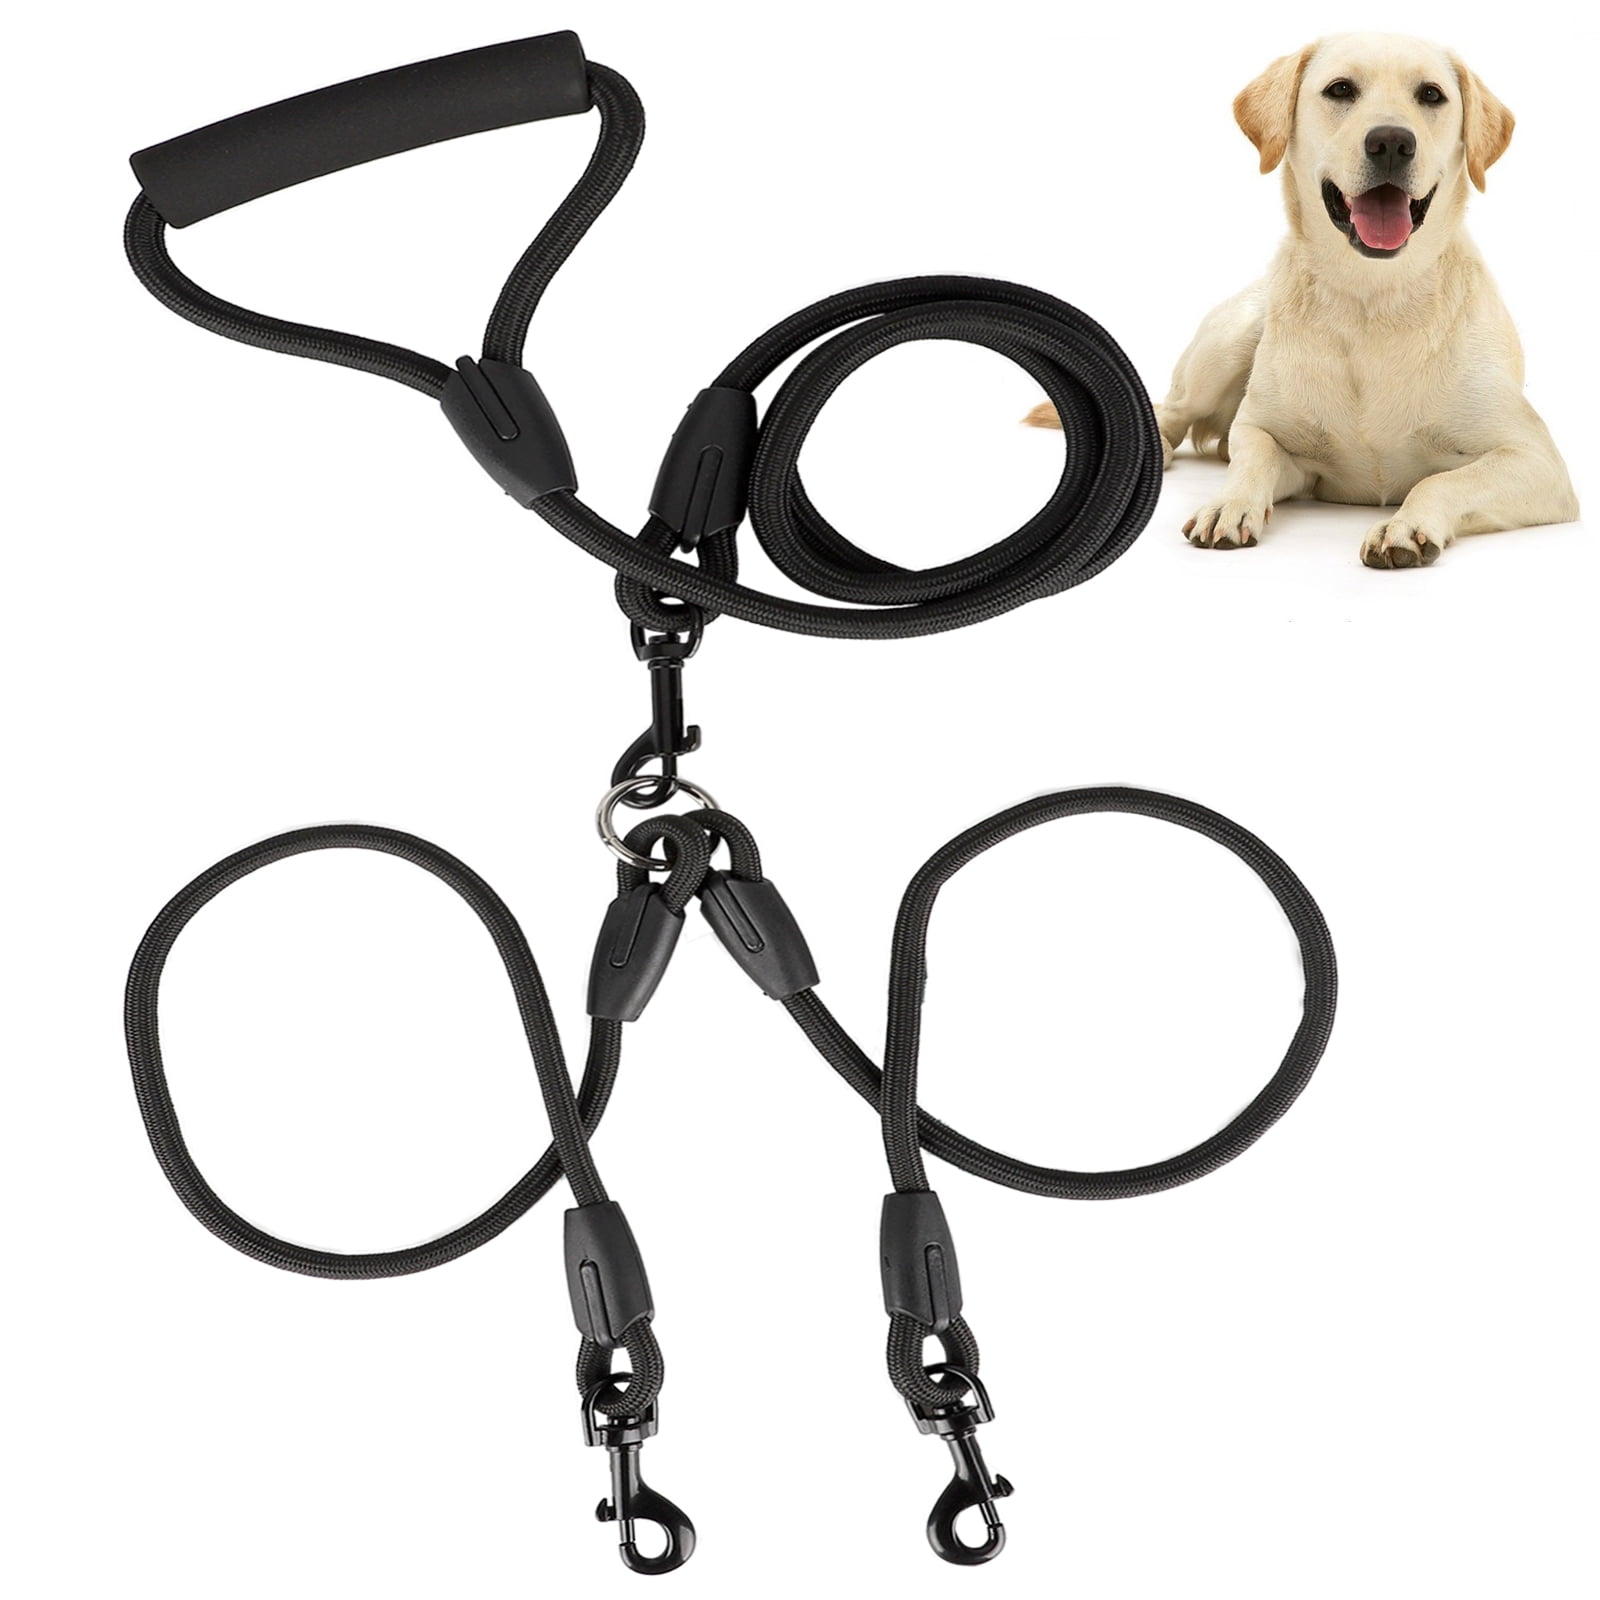 Comfortable Shock Absorbing Reflective Bungee for Two Dogs 360 Swivel No Tangle Double Dog Walking Training Leash Medium Large Dog Double Dog Leash Black Alsol Lamesa Dual Dog Leash 